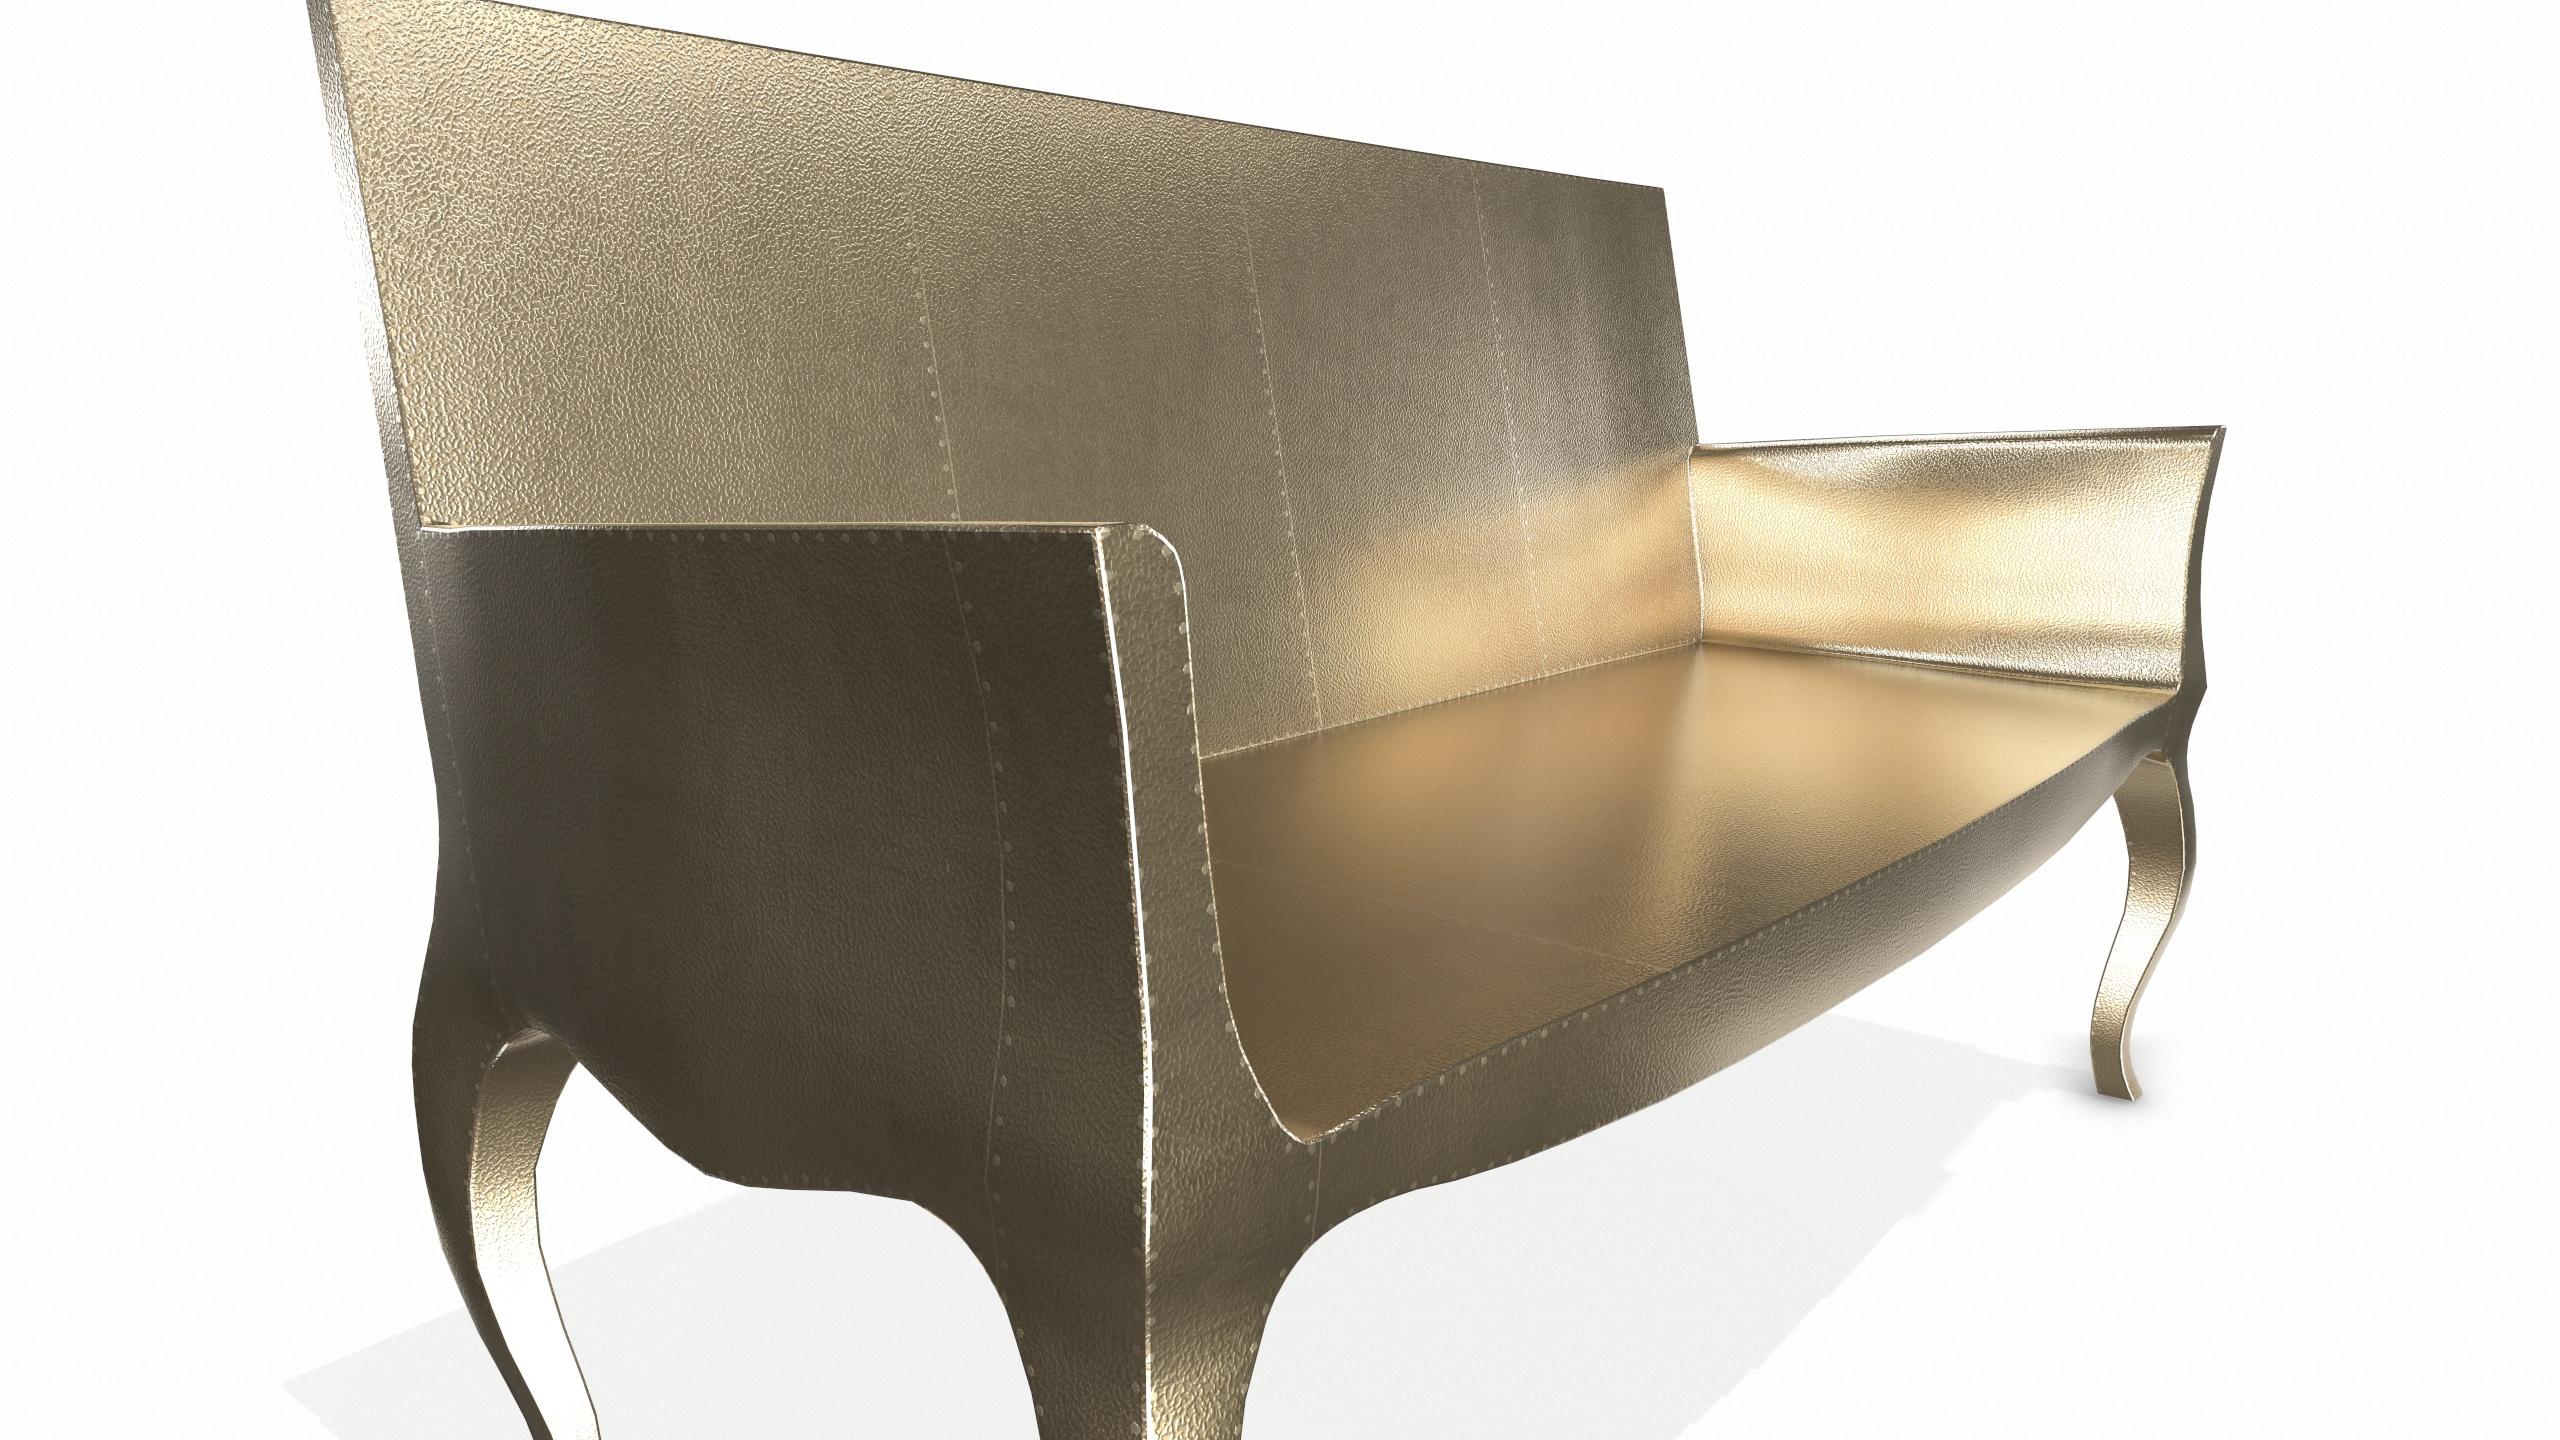 American Louise Settee Art Deco Daybeds in Fine Hammered Brass by Paul Mathieu For Sale